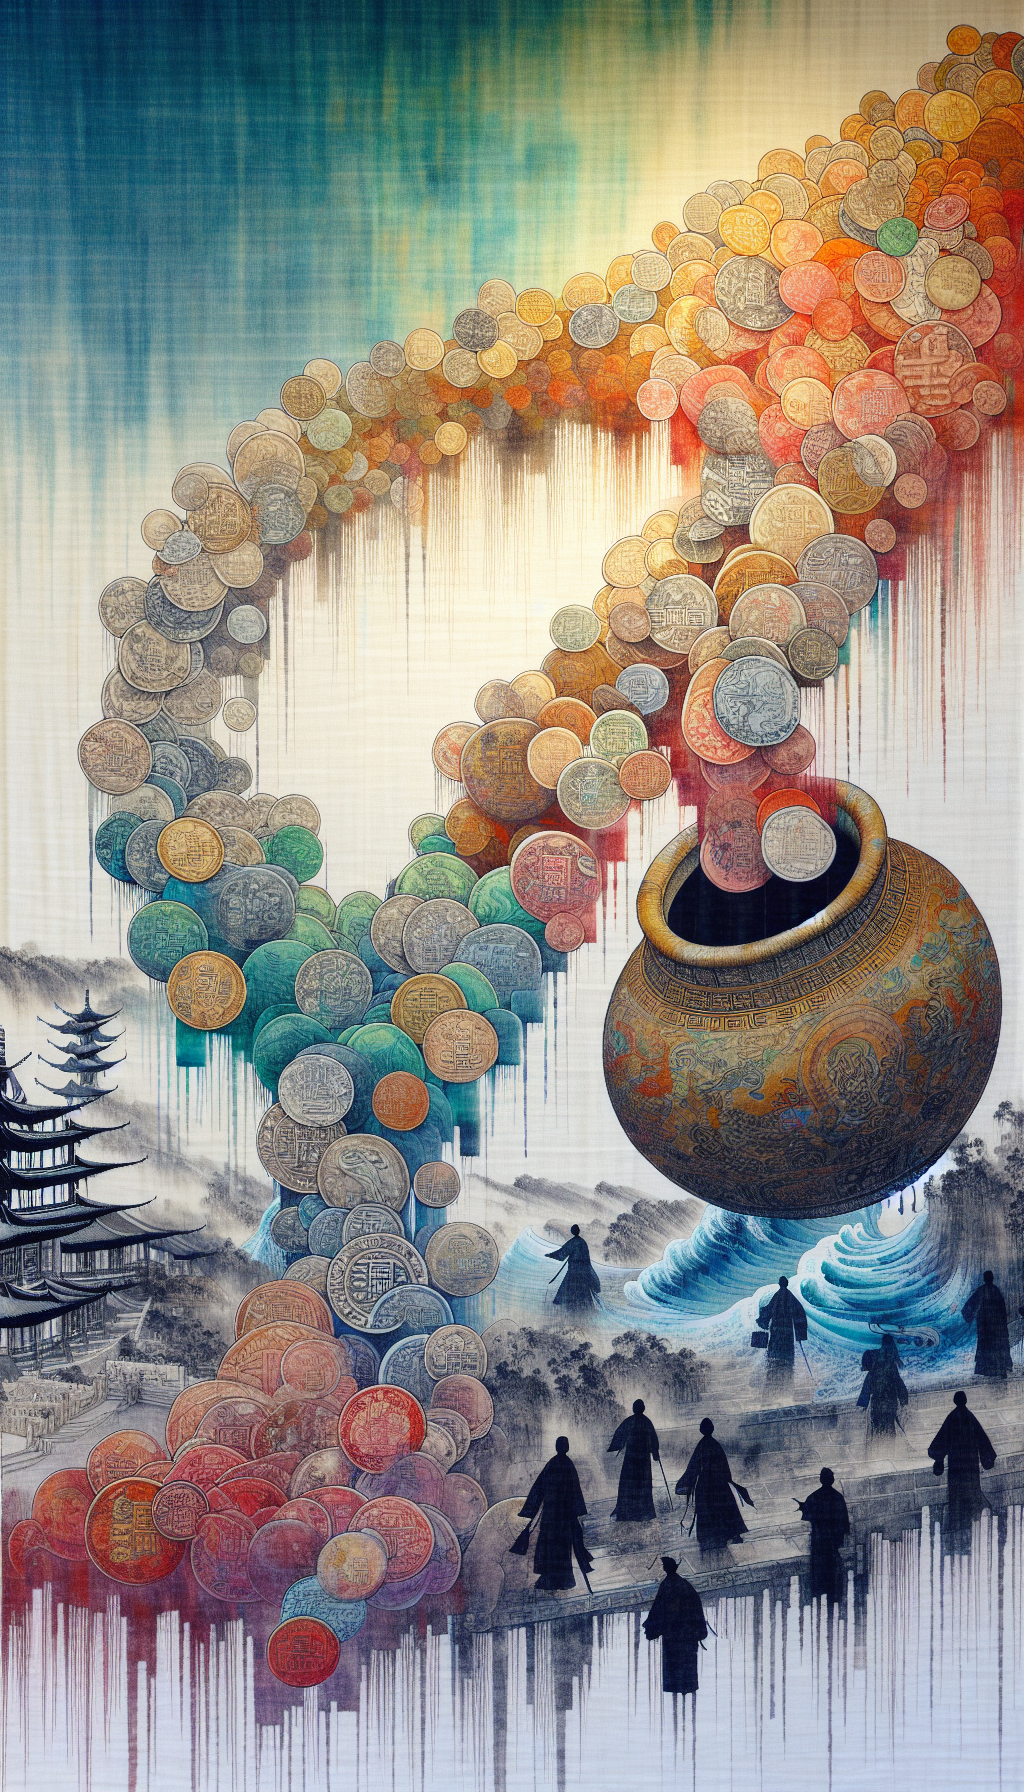 A vibrant tapestry showcases coins flowing from a Yuan Dynasty pouch into a Qing vase, morphing in design as they traverse historical landmarks. Along the edges, ghostly silhouettes of traders and collectors hint at the enduring value of these coins. The styles vary abruptly, fusing ink wash, watercolor splashes, and crisp woodblock prints, capturing China's rich numismatic evolution.